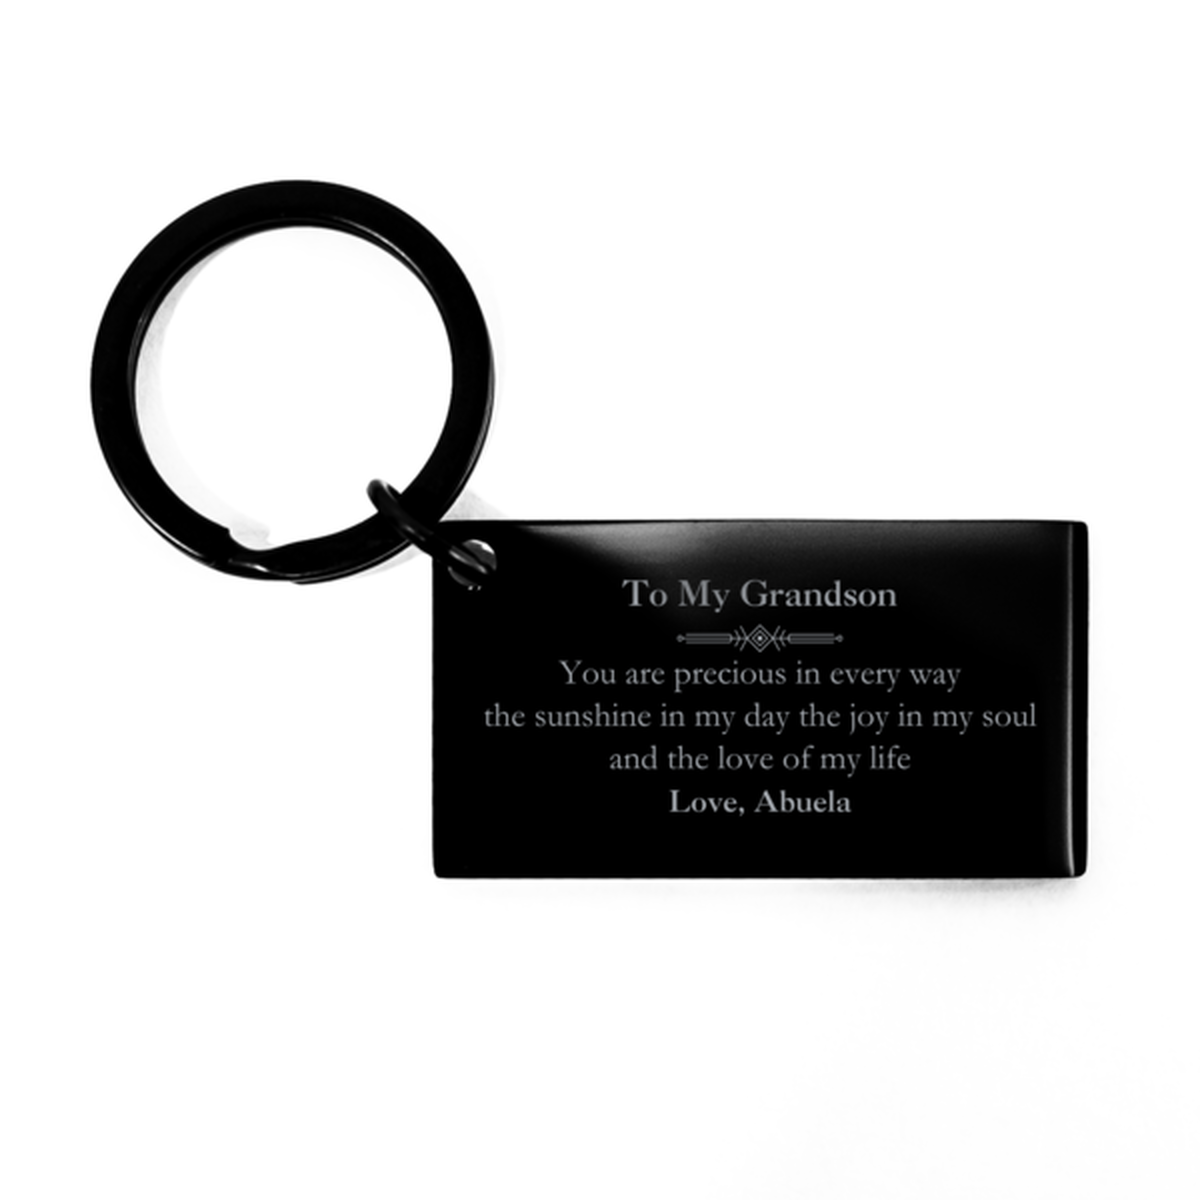 Graduation Gifts for Grandson Keychain Present from Abuela, Christmas Grandson Birthday Gifts Grandson You are precious in every way the sunshine in my day. Love, Abuela